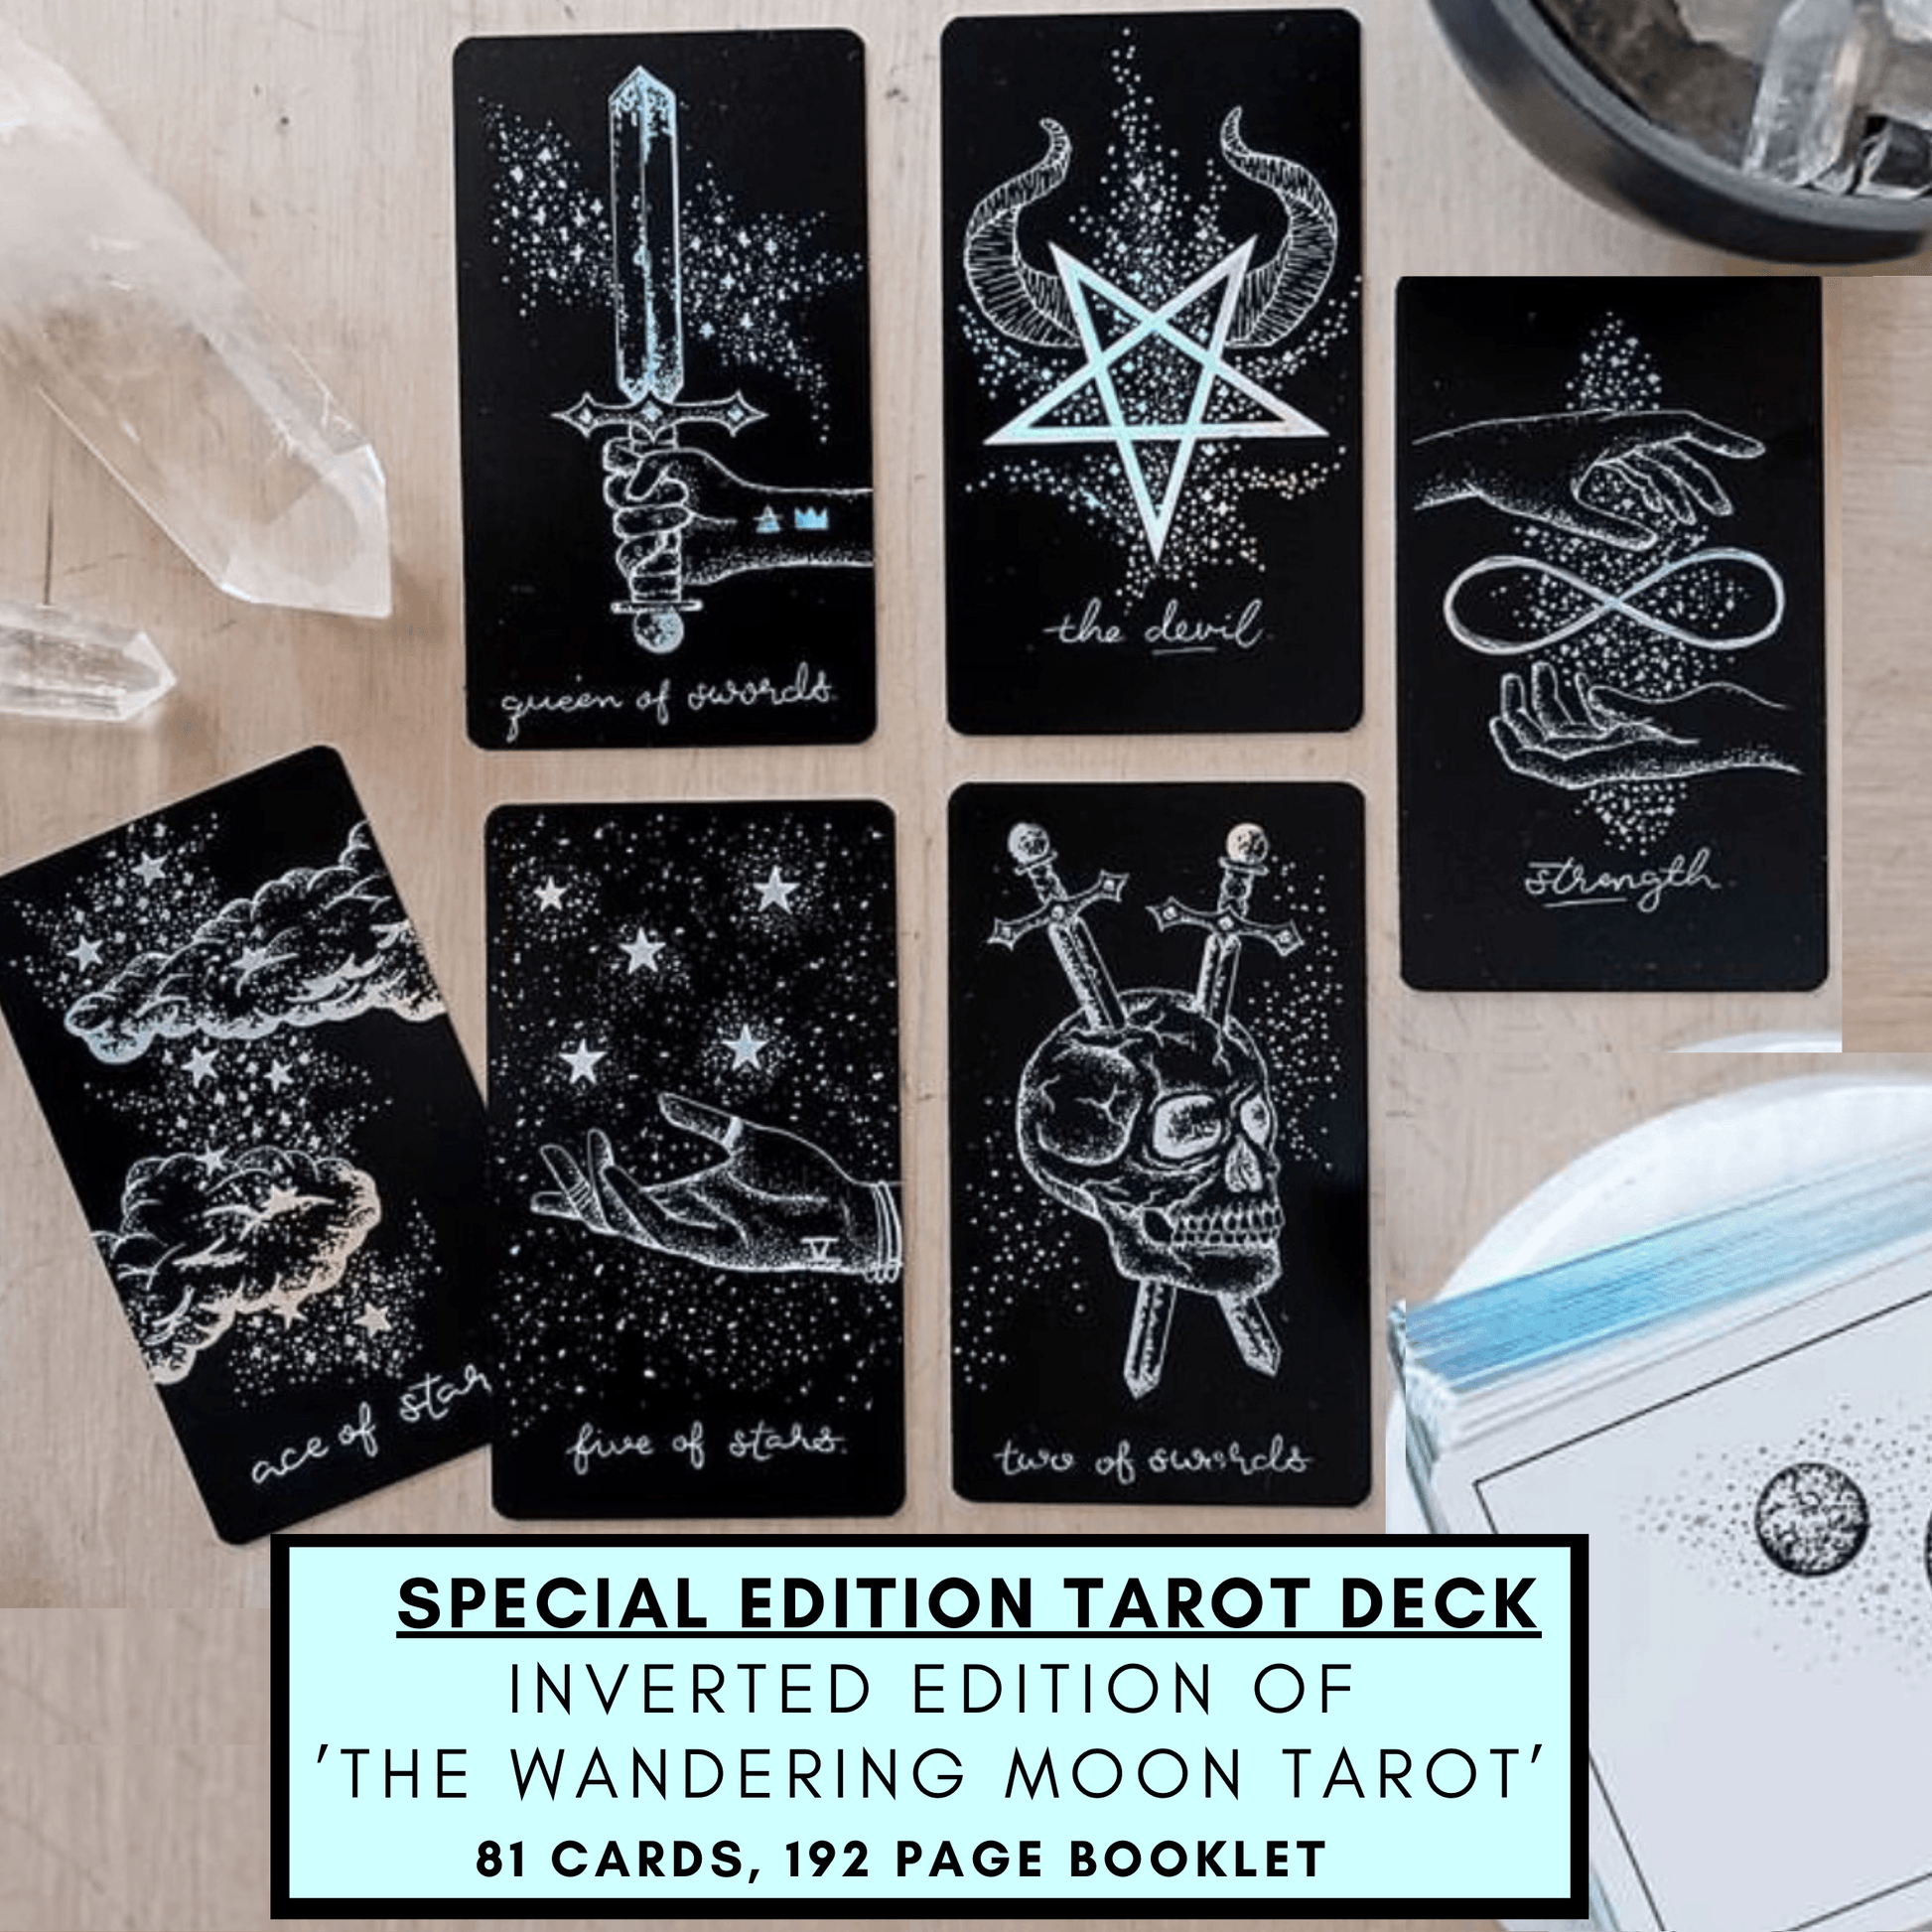 6 cards in tarot spread layout, the devil card stands out, from Midnight Sky indie tarot deck